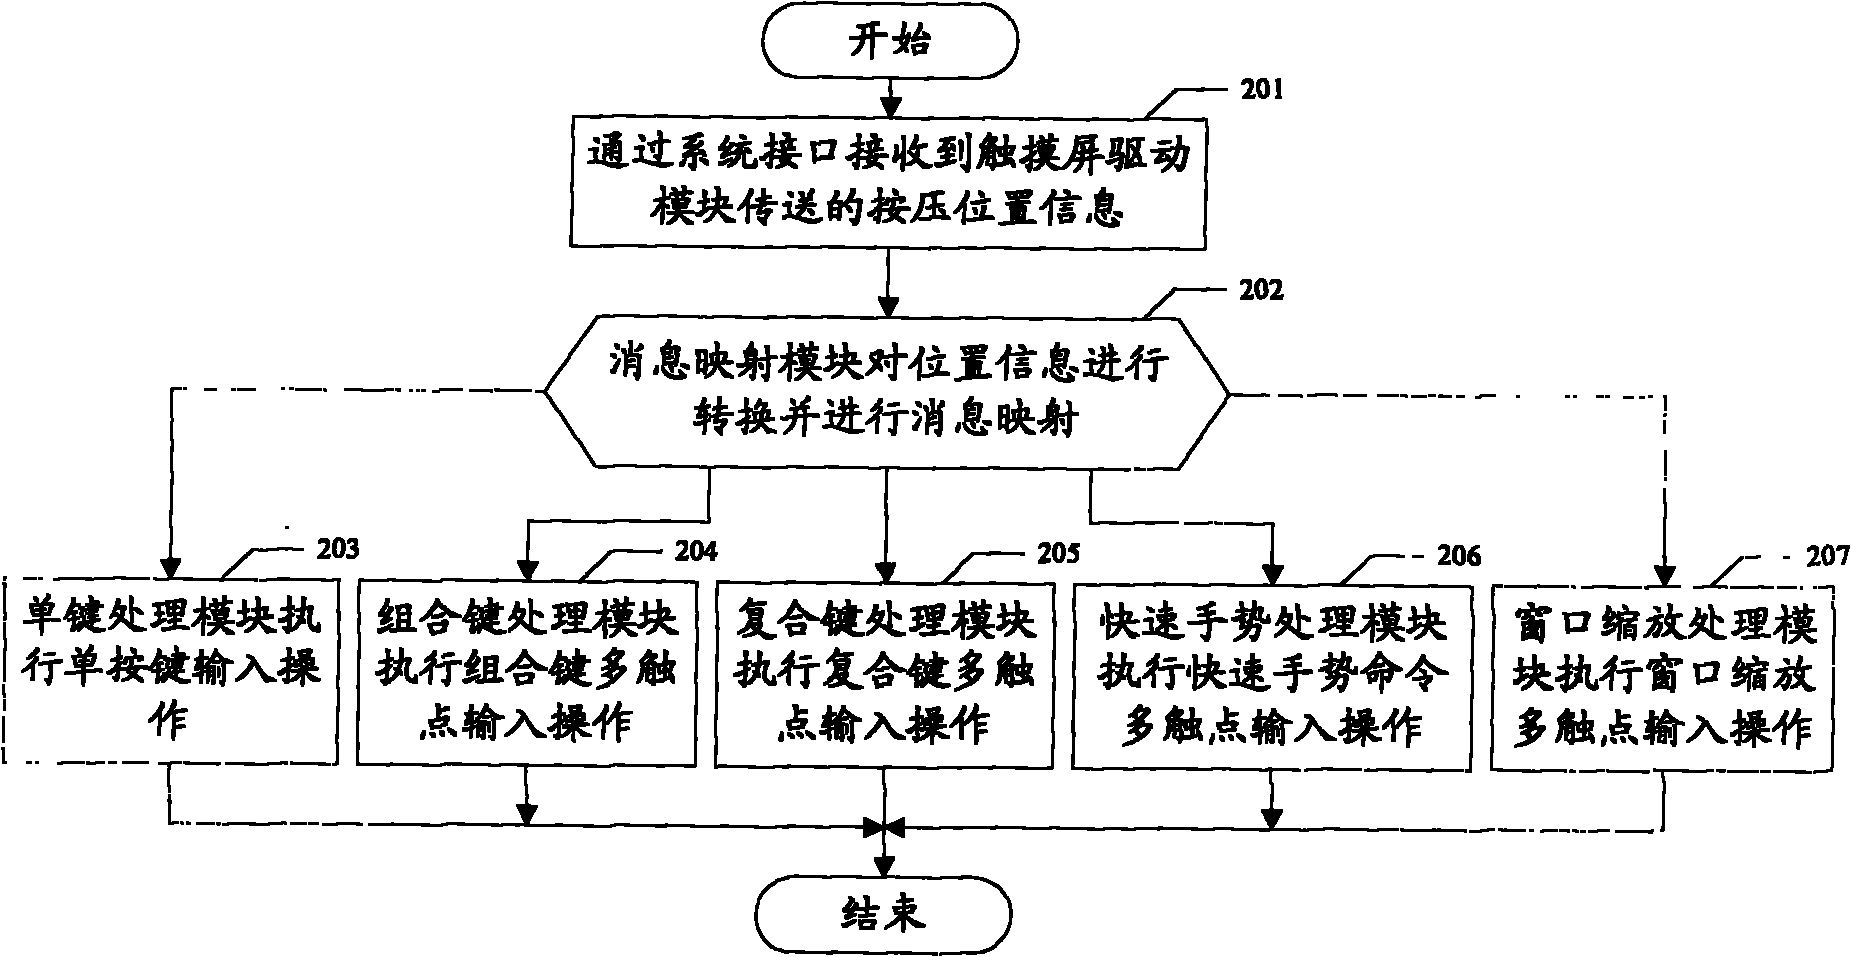 Multi-contact input method and device based on touch screen